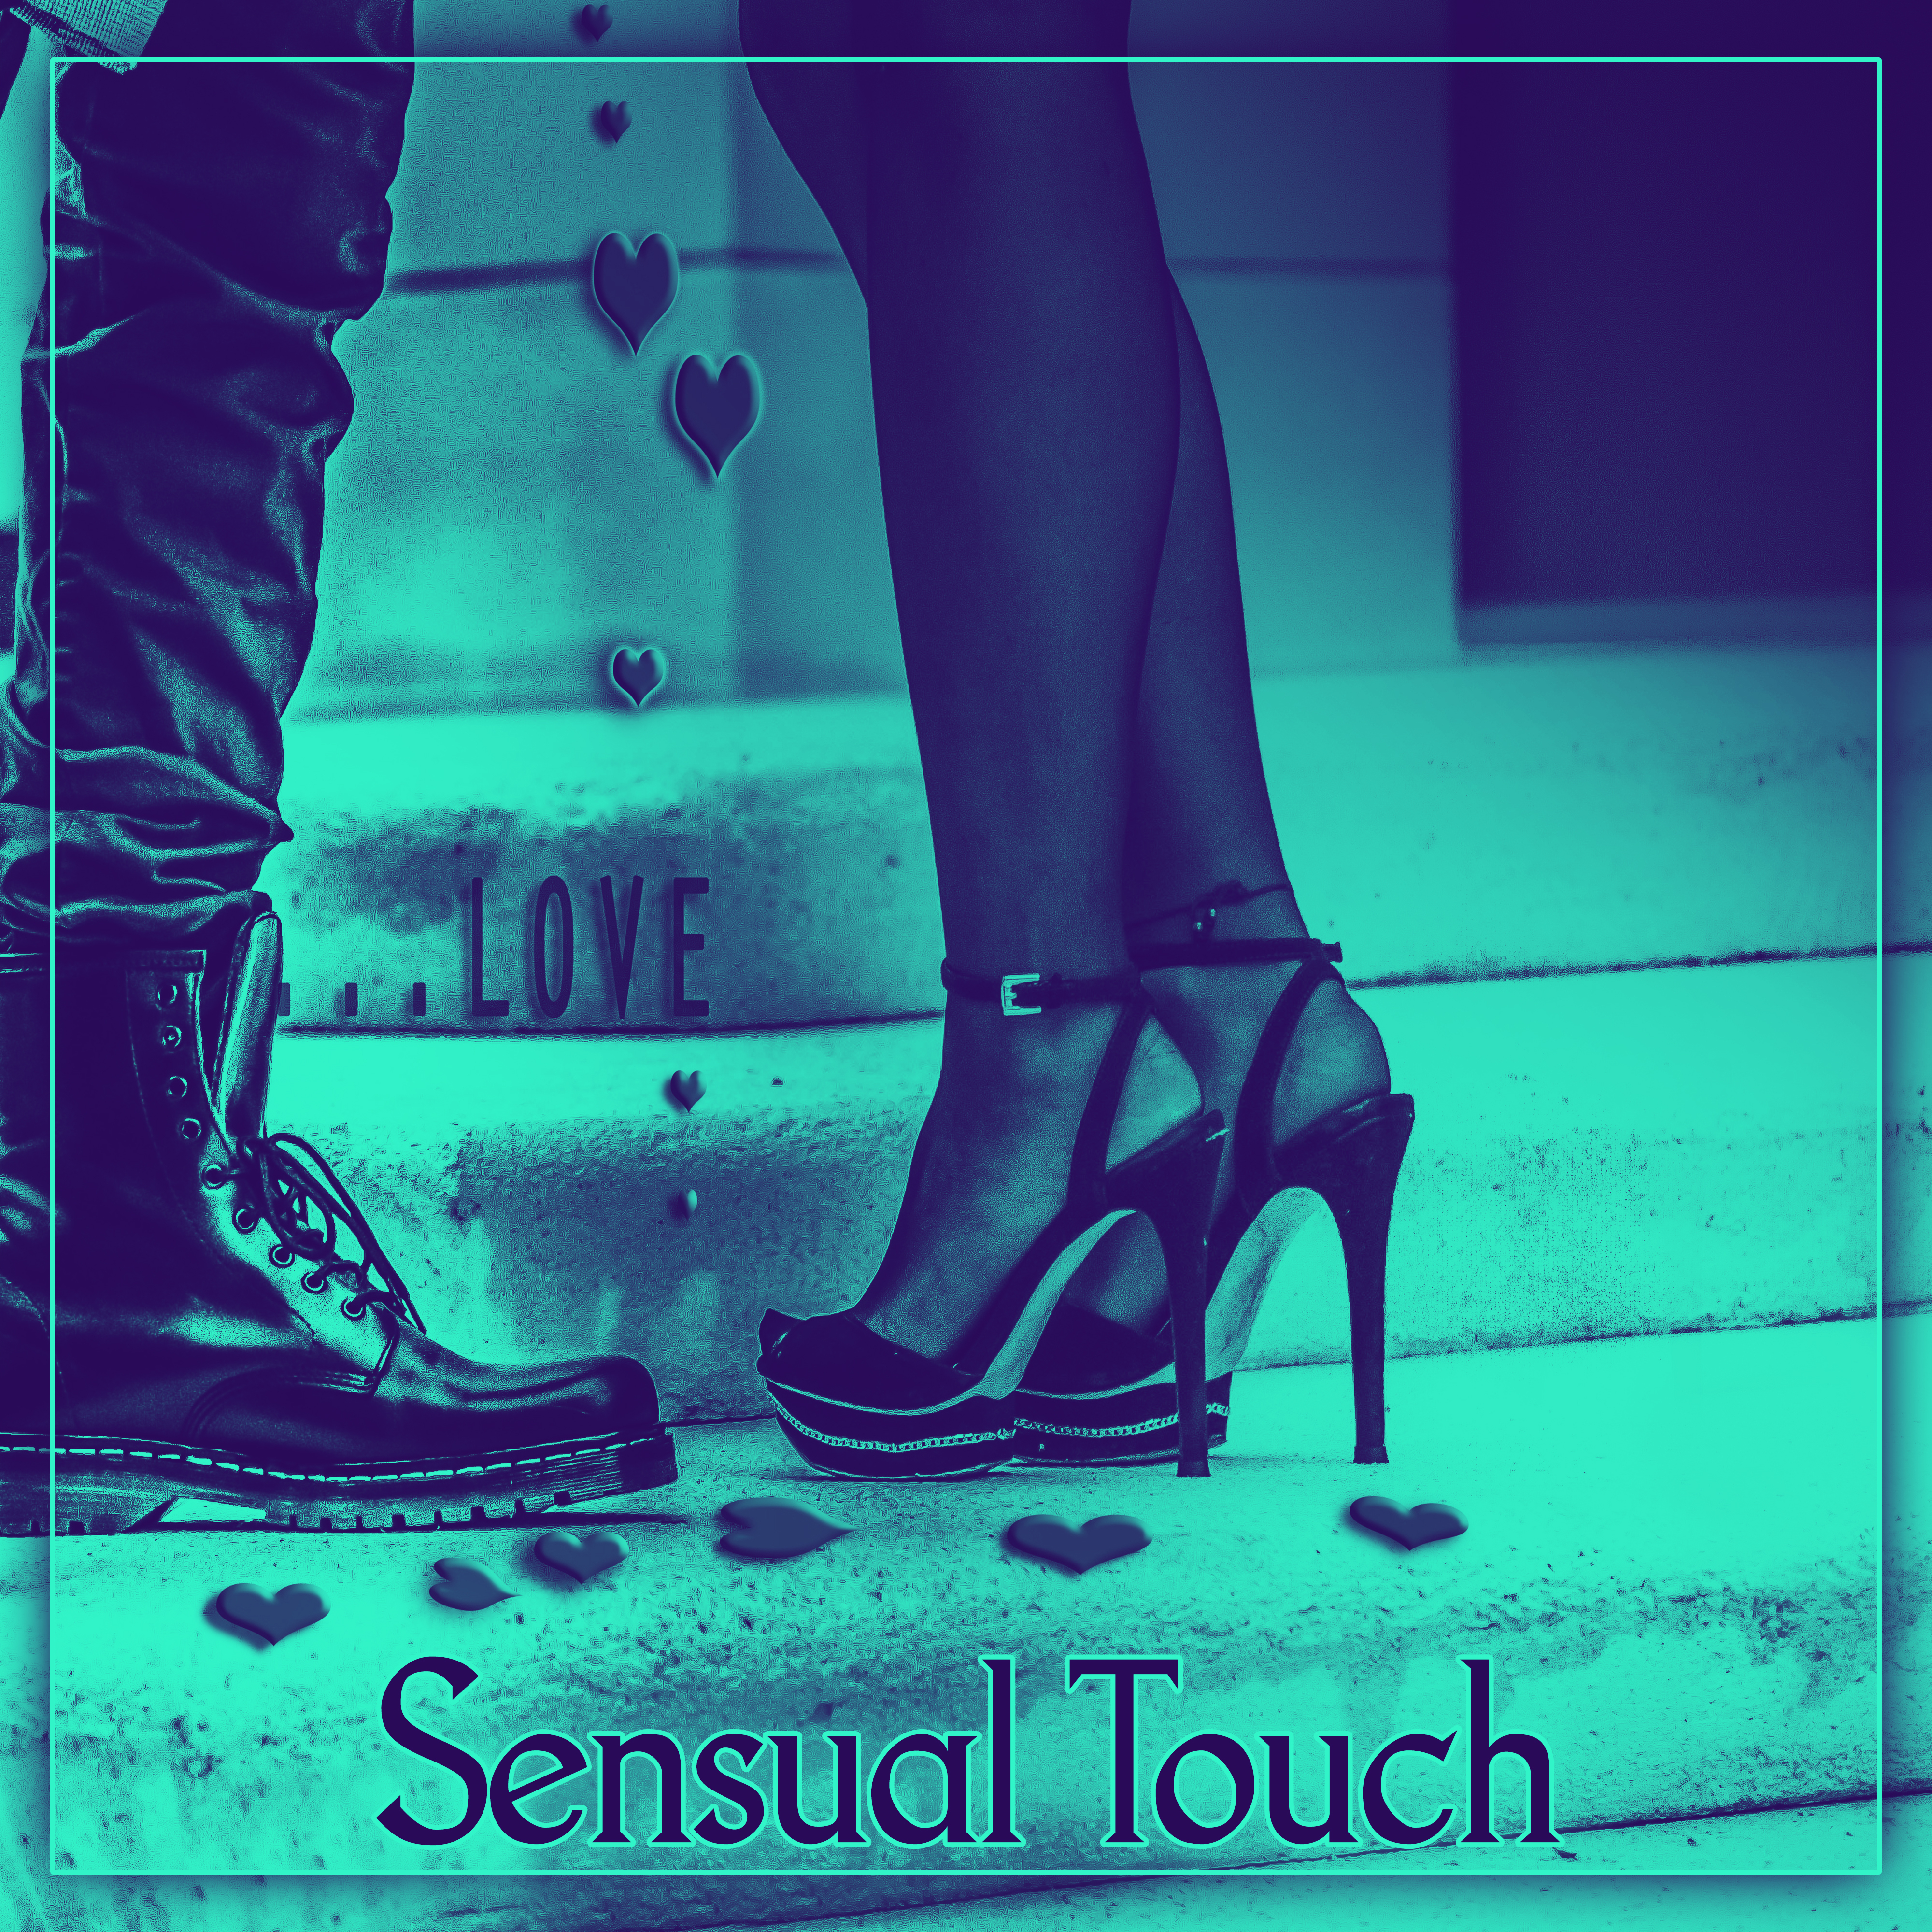 Sensual Touch  Serenity Music, Seduction, Erotic Music, Deep Music, Music for Lovers